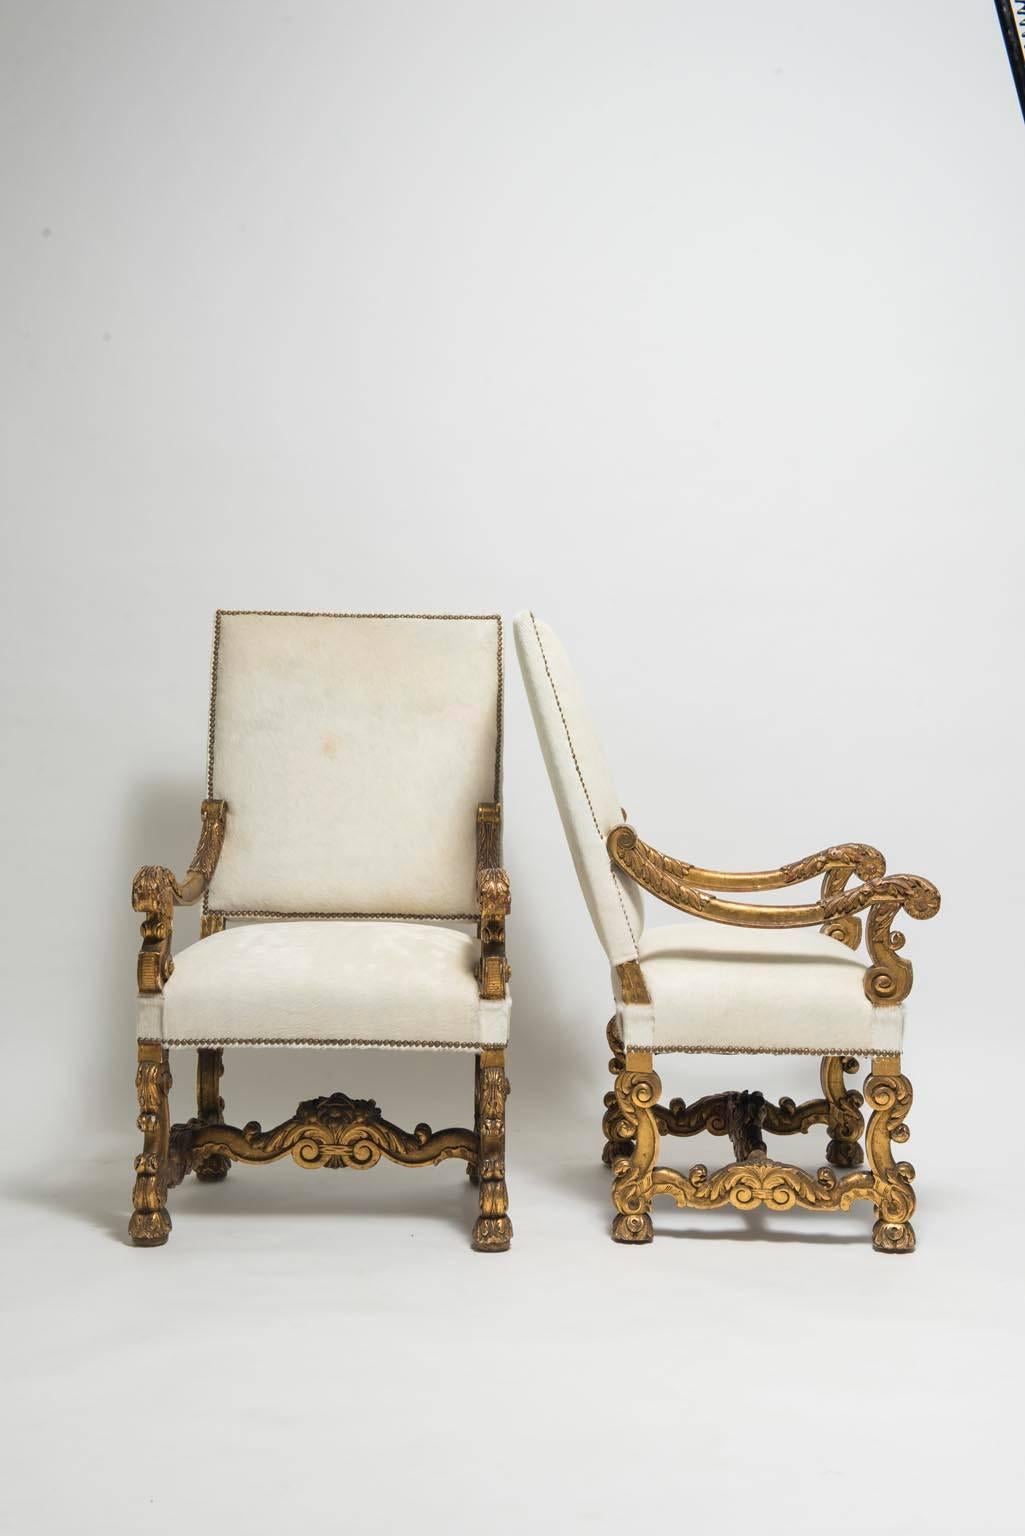 A pair of 19th century Italian Louis XIV style giltwood fauteuils newly upholstered in a creamy ecru white hair hide (French product tanned in Italy) with nailhead detail.